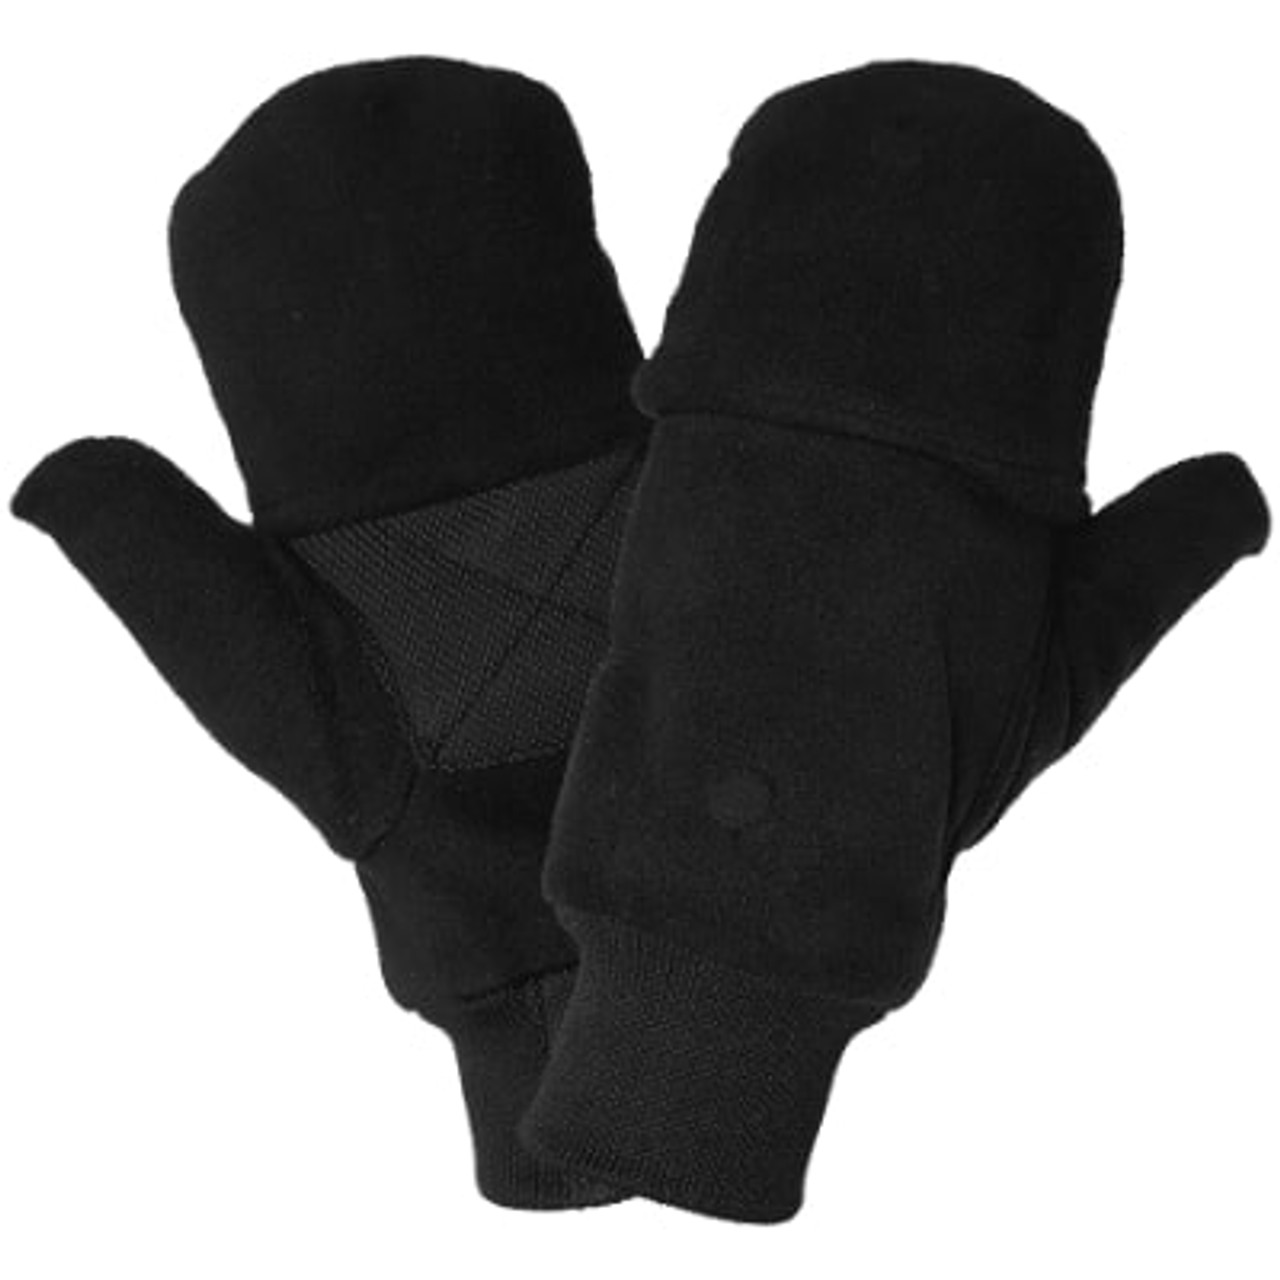 Thinsulate Convertible Mittens Work Gloves For Freezers